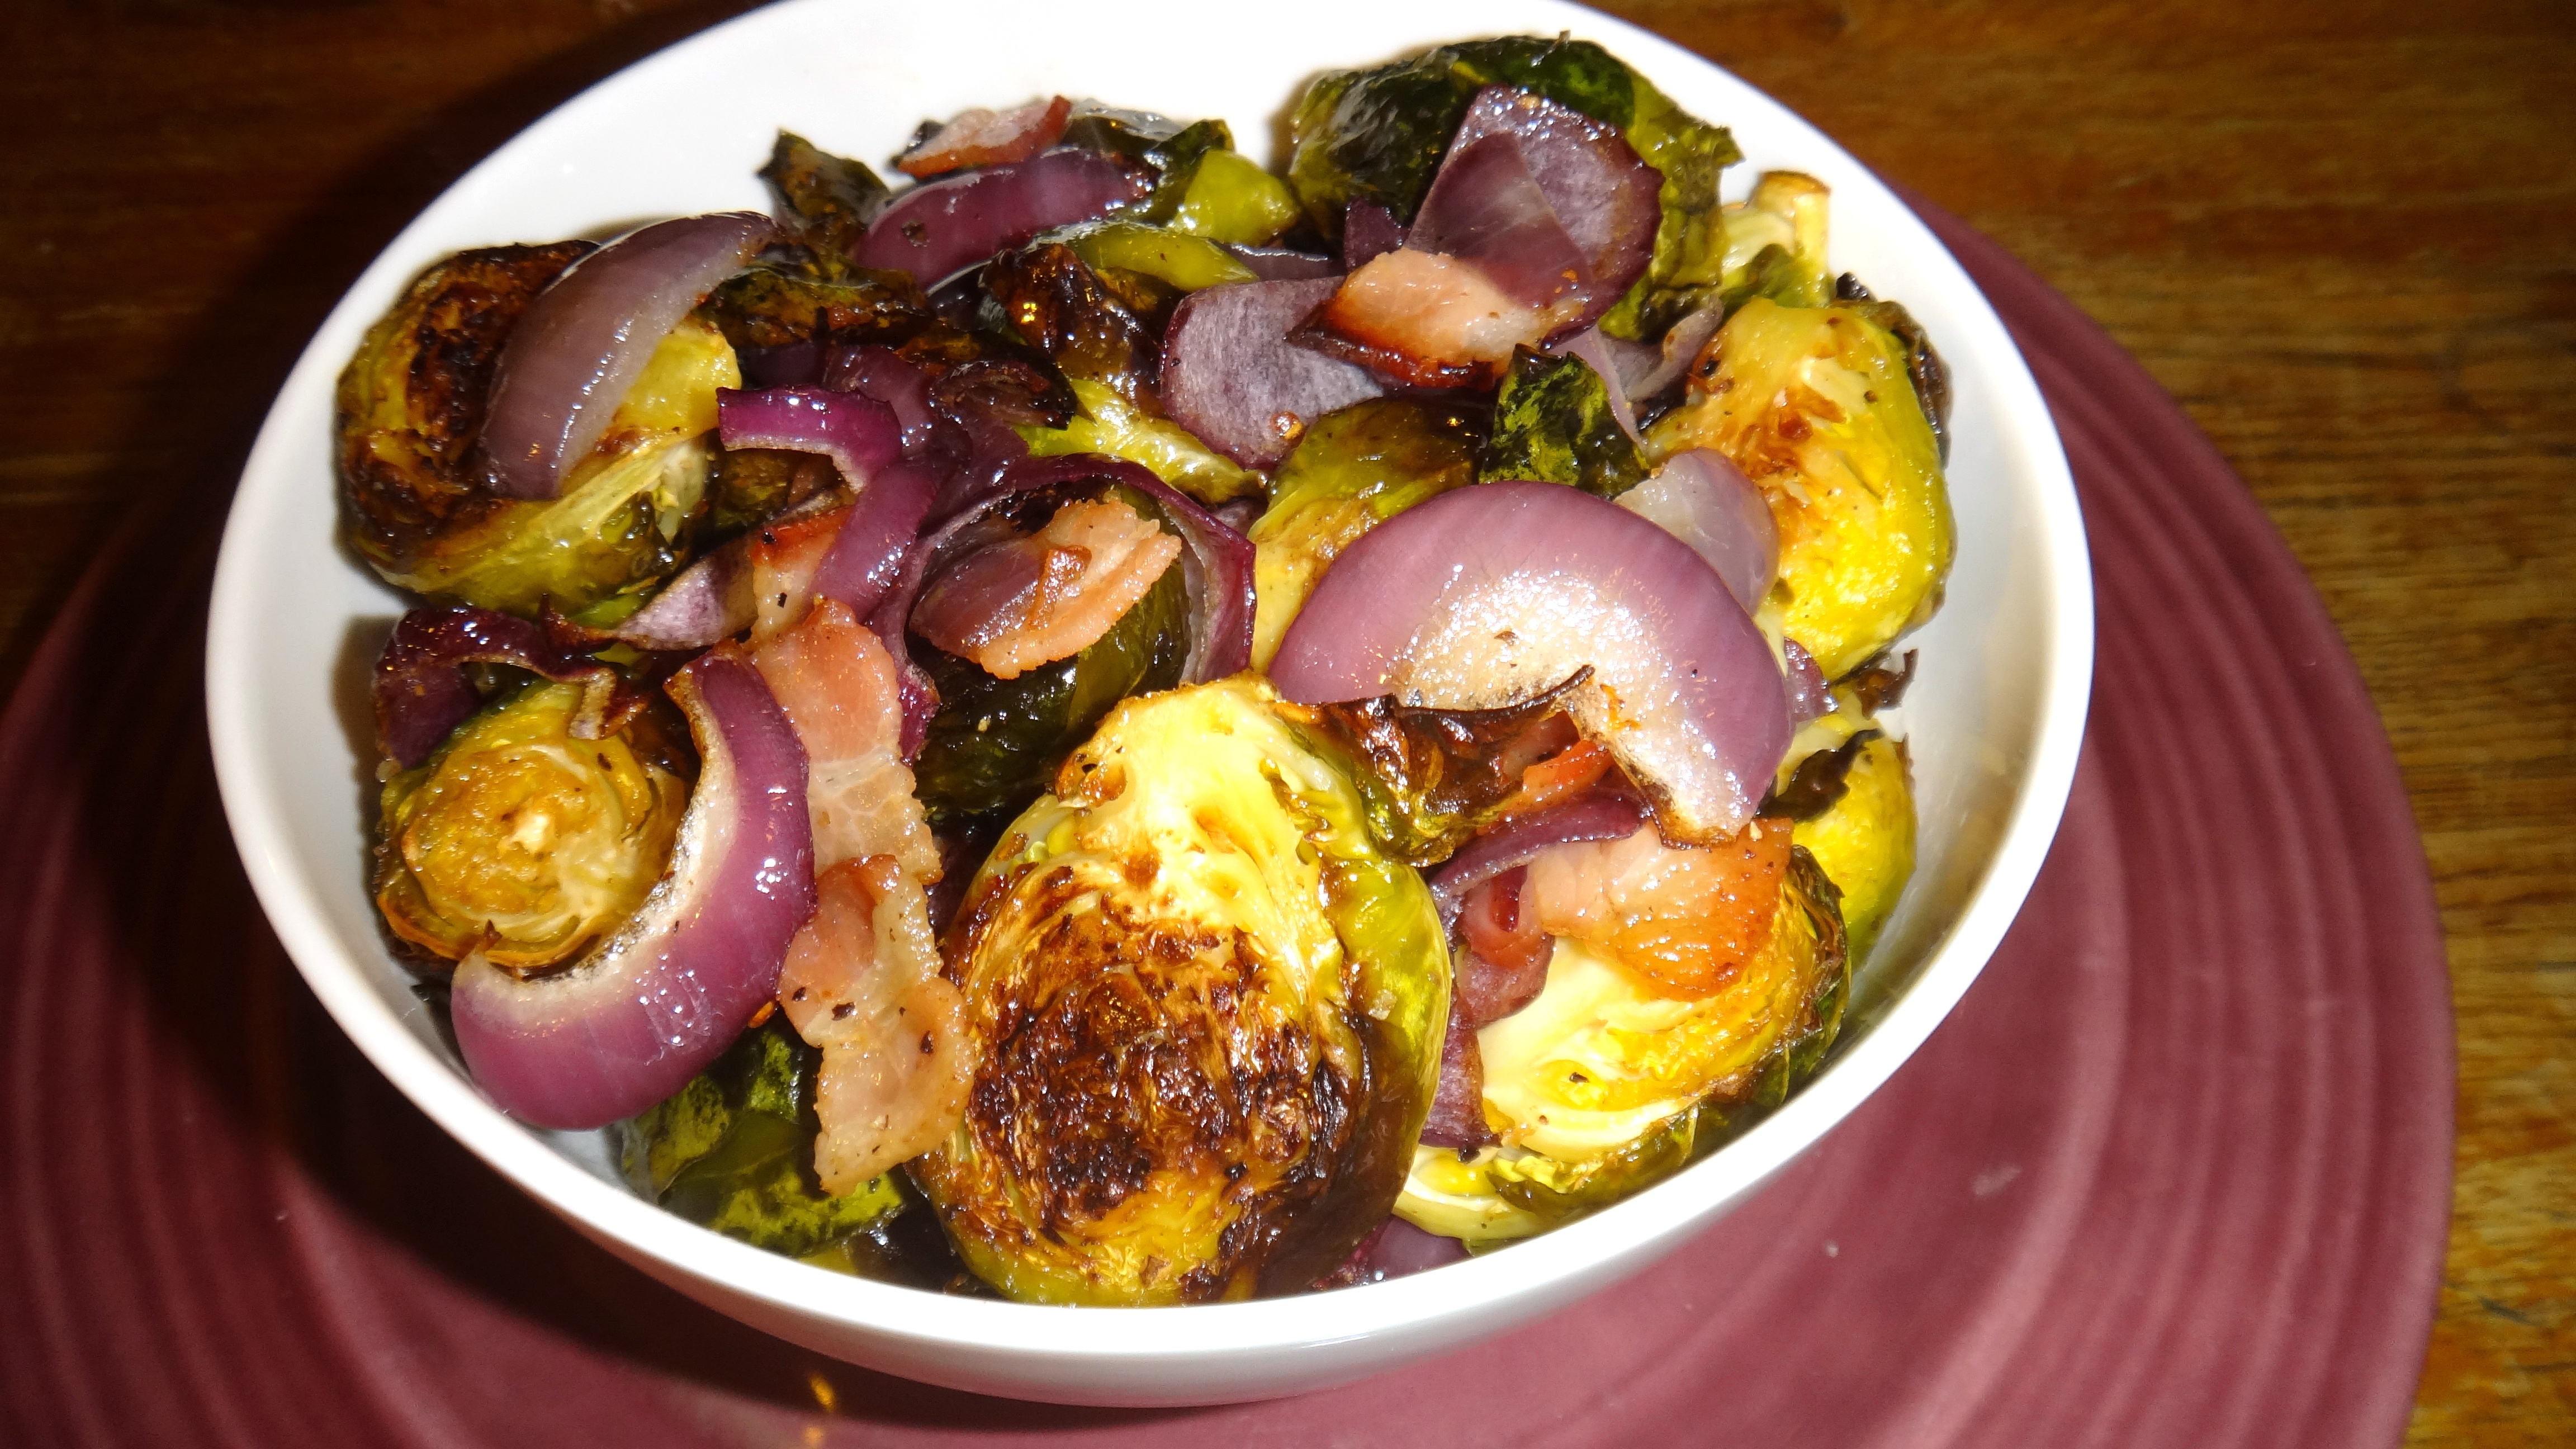 Roasted Brussels Sprouts with Bacon and Caramelized Red Onion Recipe